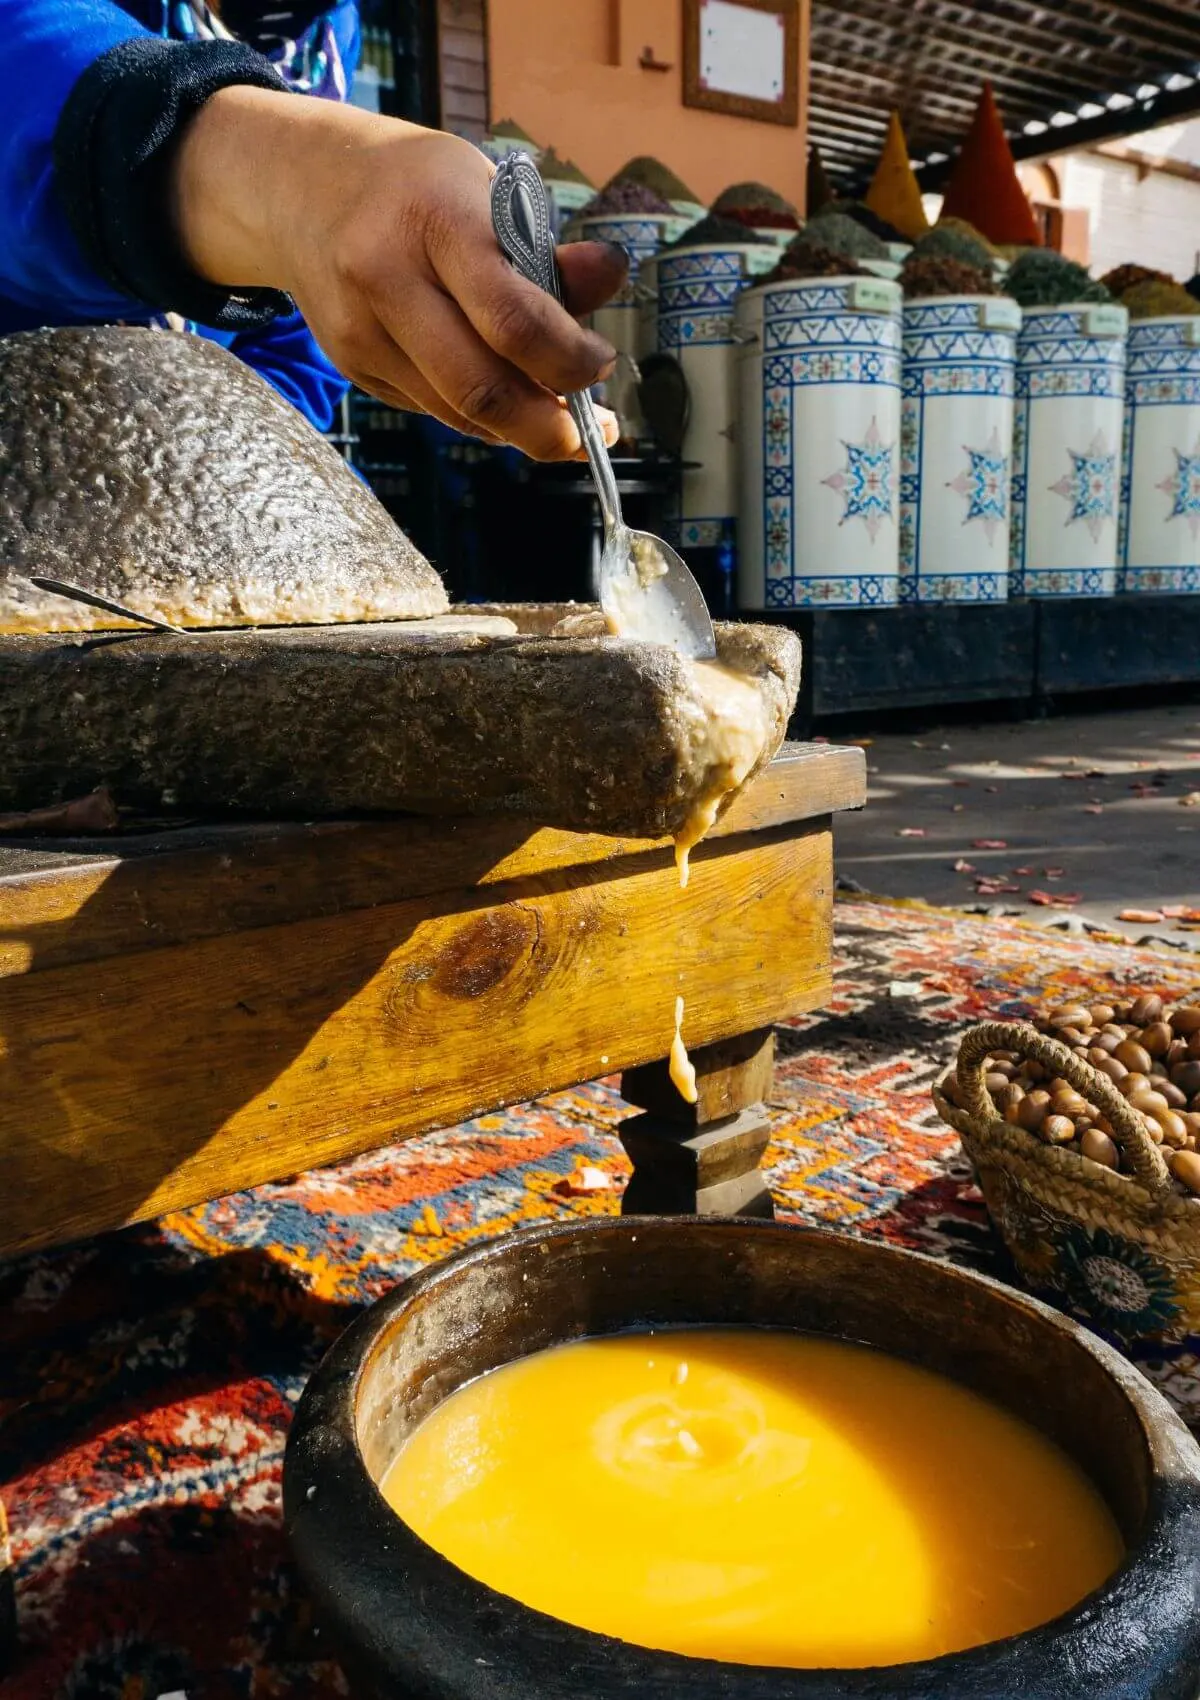 Argan oil souvenirs from Morocco